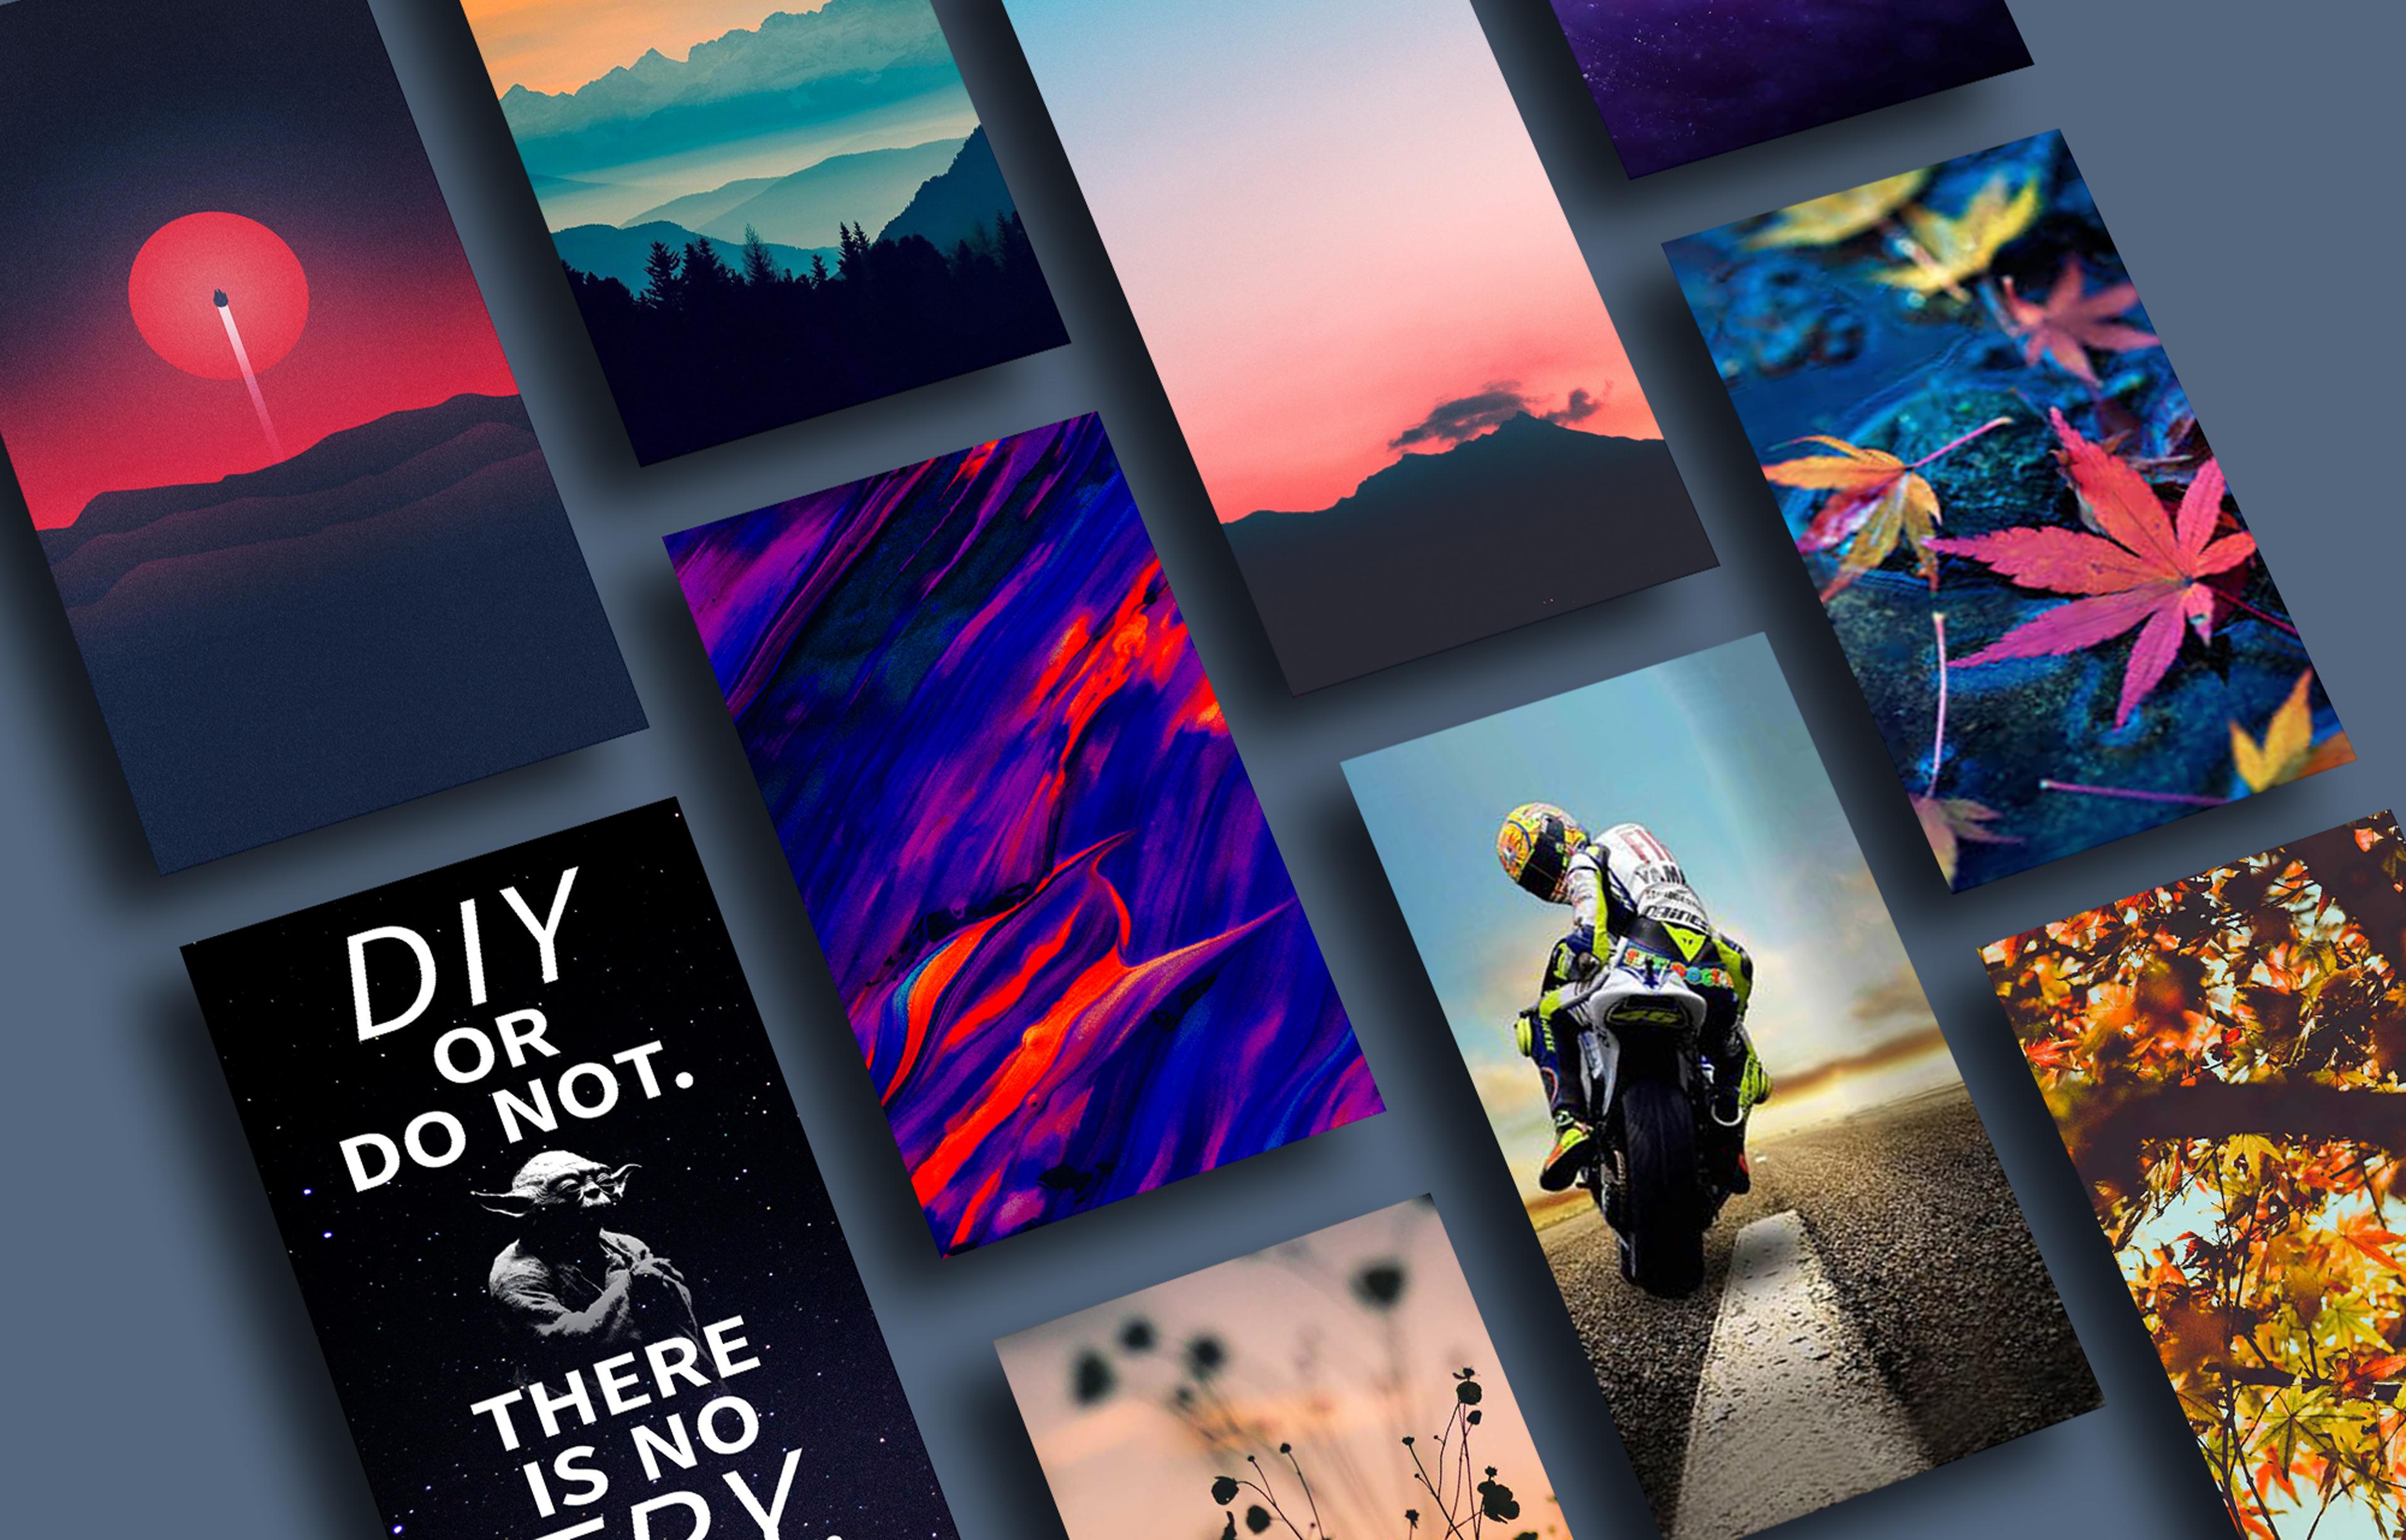 4K Wallpaper Hub for Android - APK Download